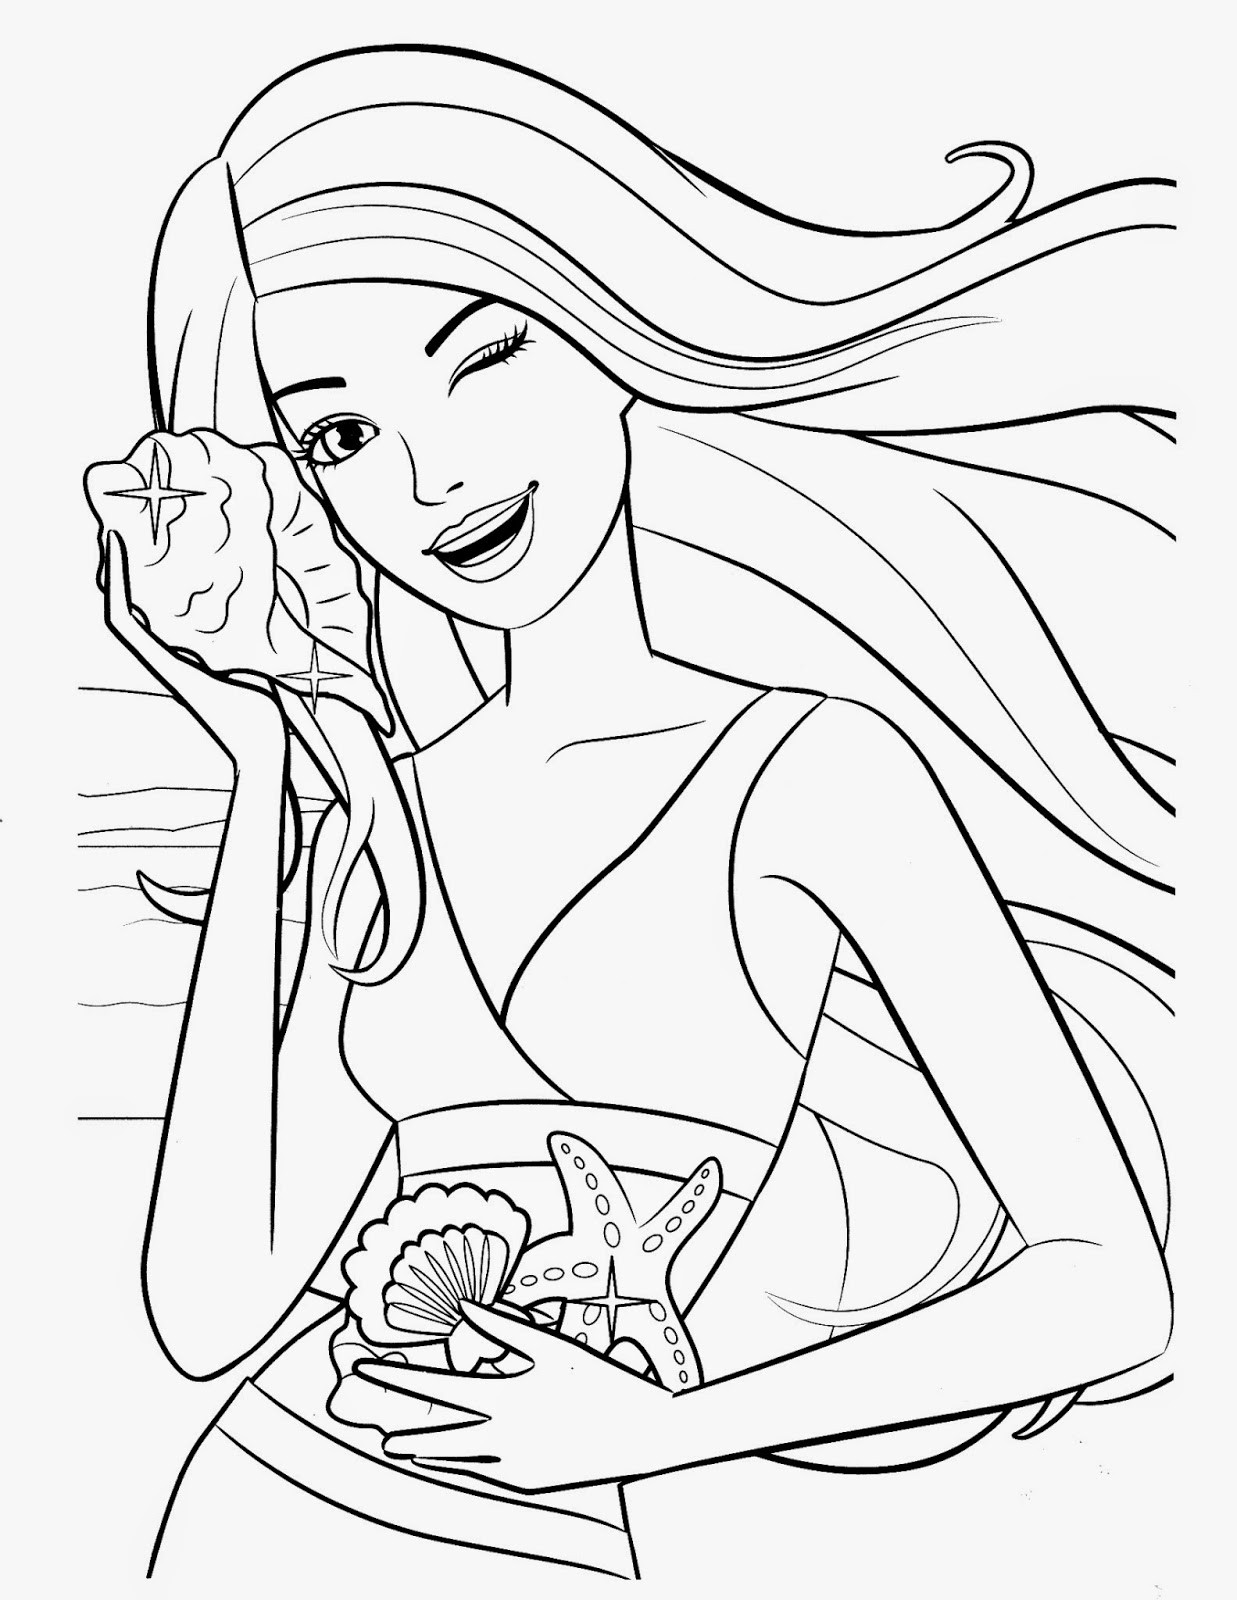 Printable Barbie Coloring Pages
 Coloring Pages Barbie Free Printable Coloring Pages